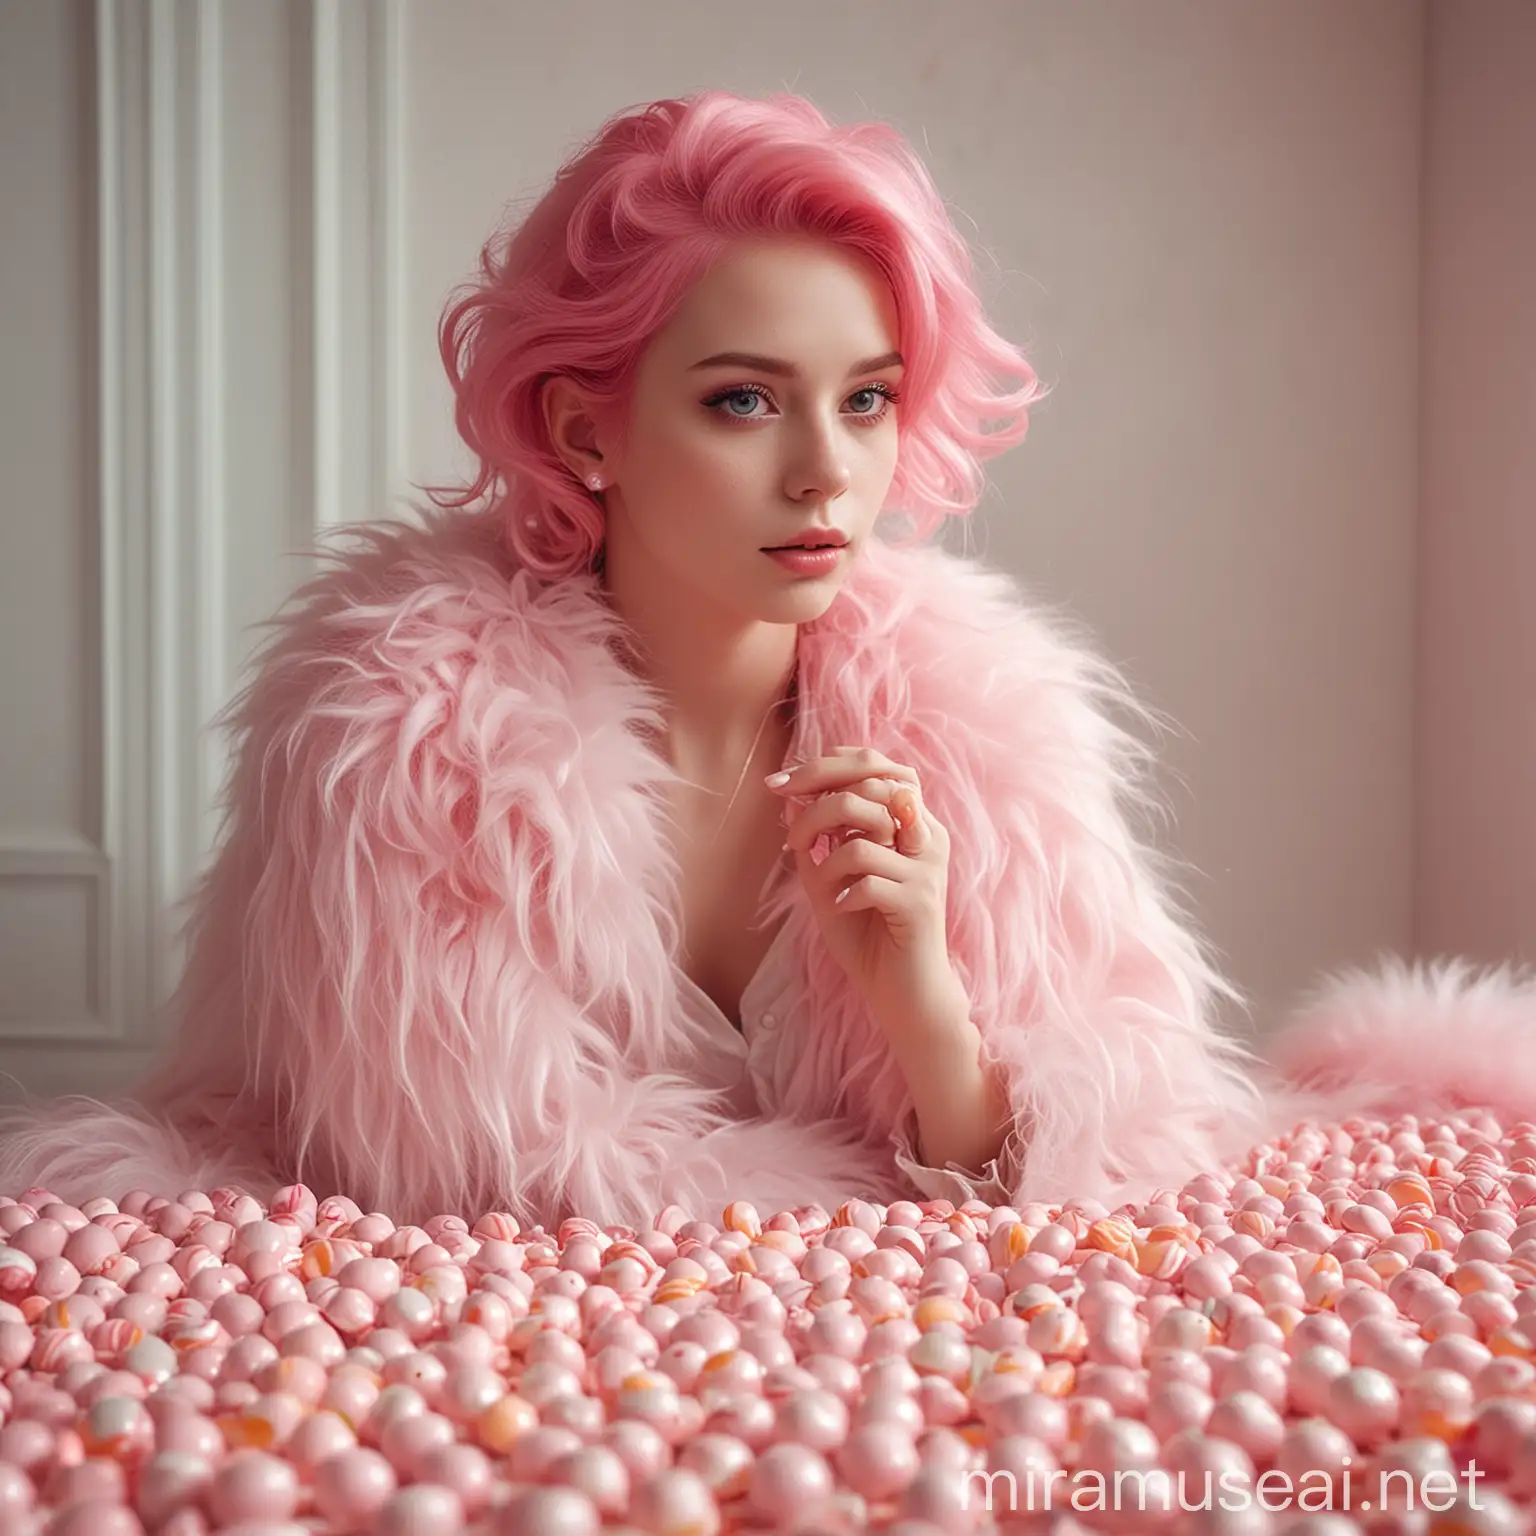 Create a character of a woman with pink hair, surrounded by candies.

The woman must be sitting in a room surrounded by cream and yogurt.

The woman must be in pastel-colored attire.

The sweet concept, soft fur, extremely detailed, Haute couture, cinematic photography, soft focus.
